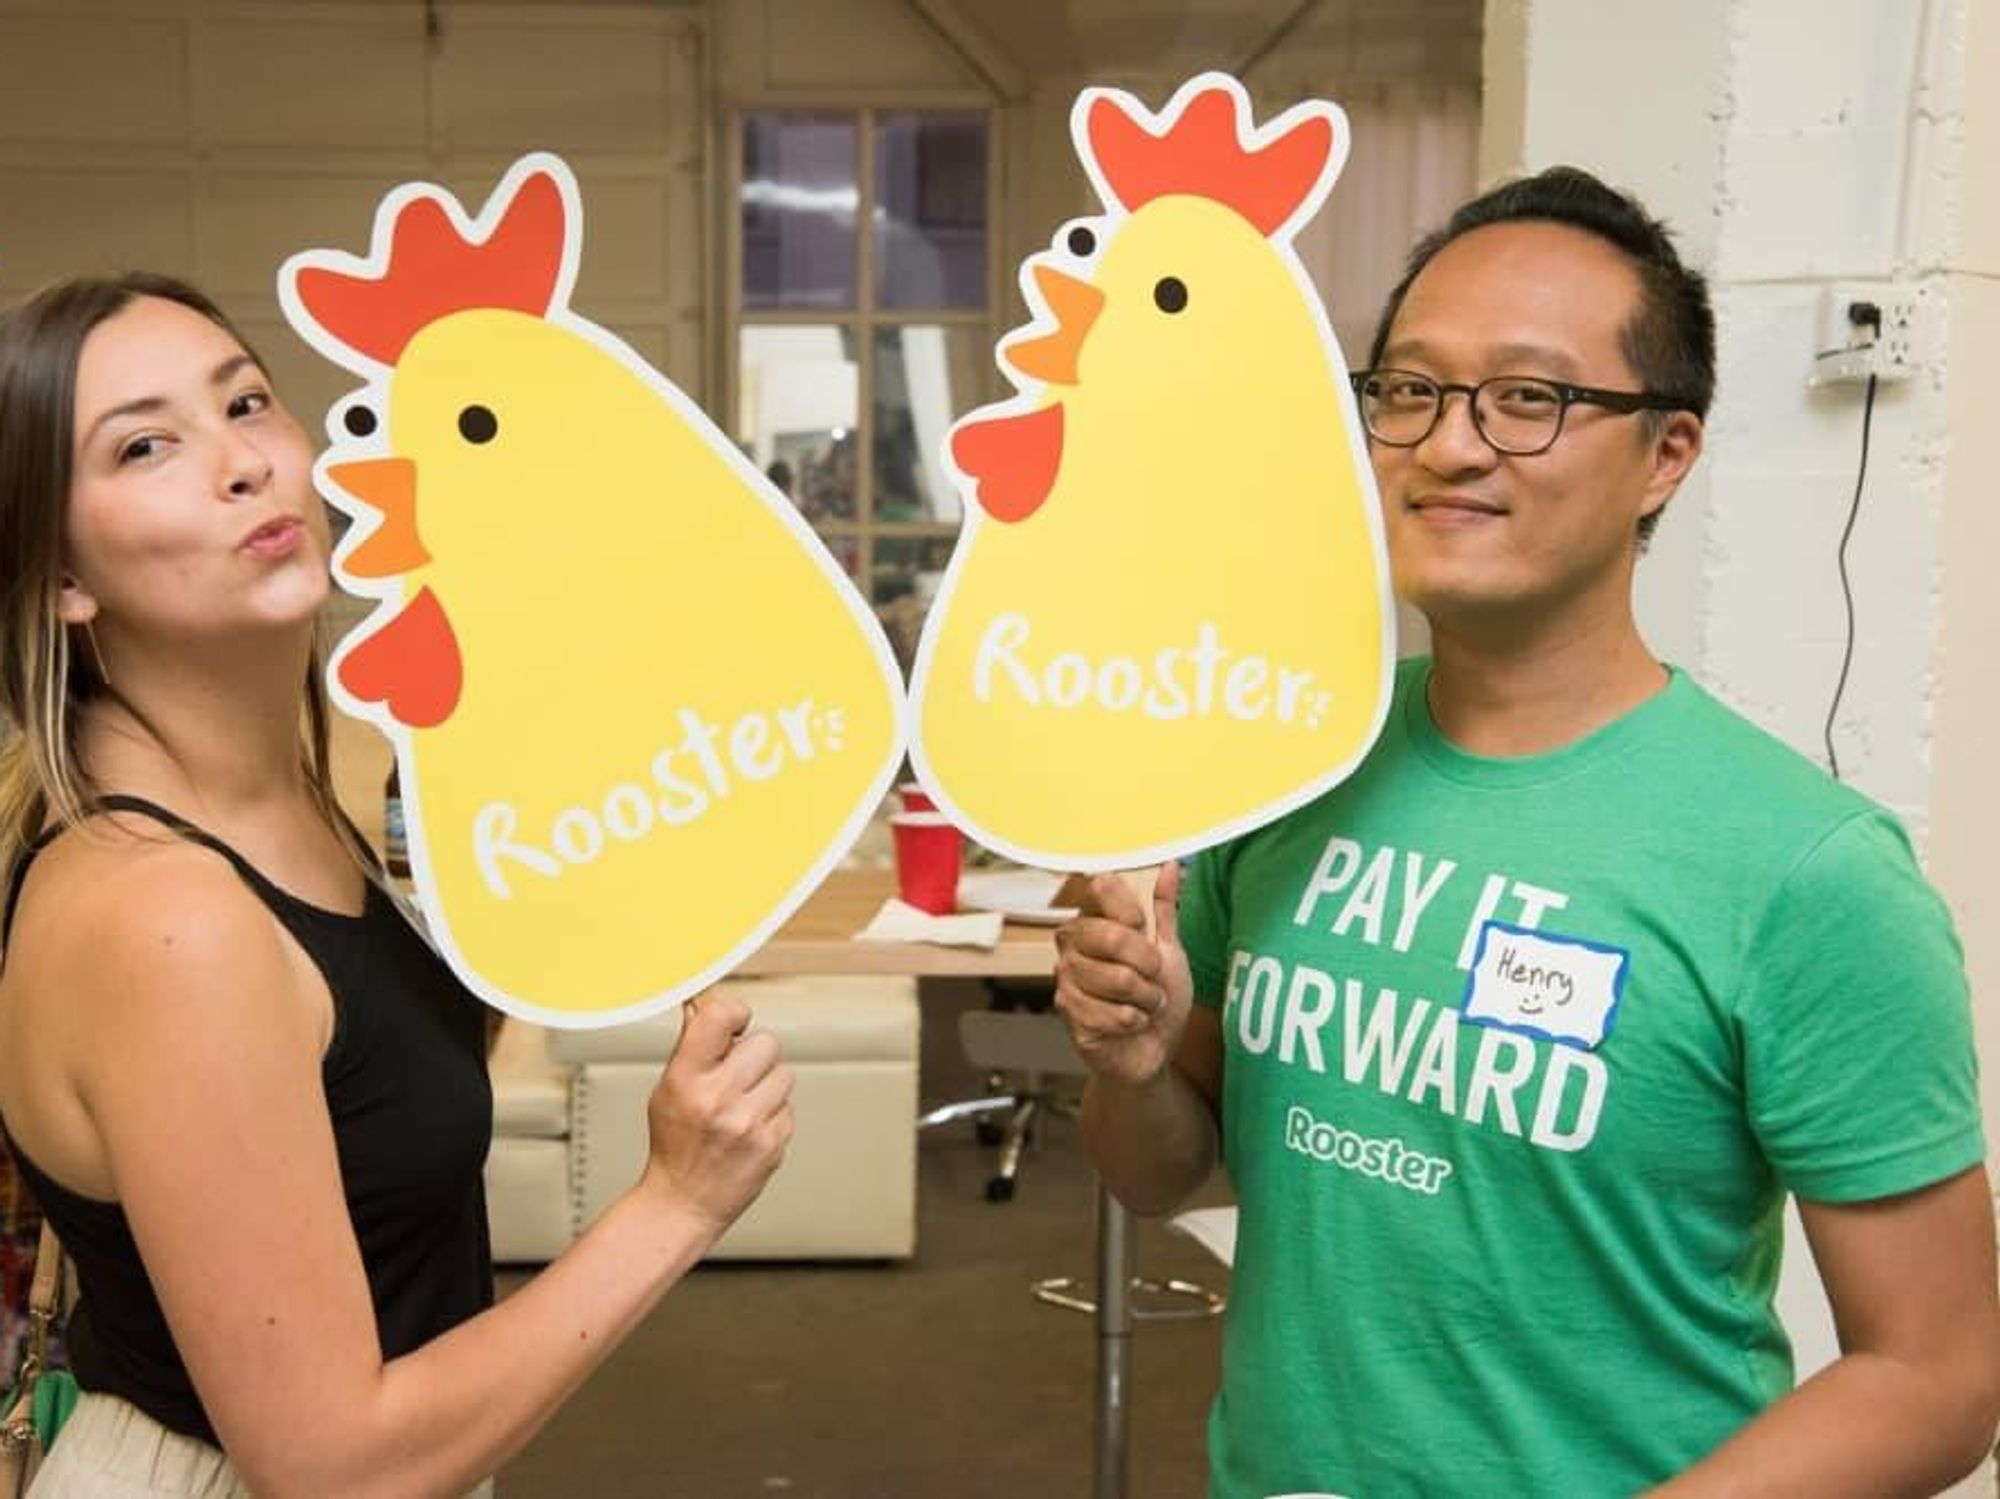 Rooster Pay it Forward App